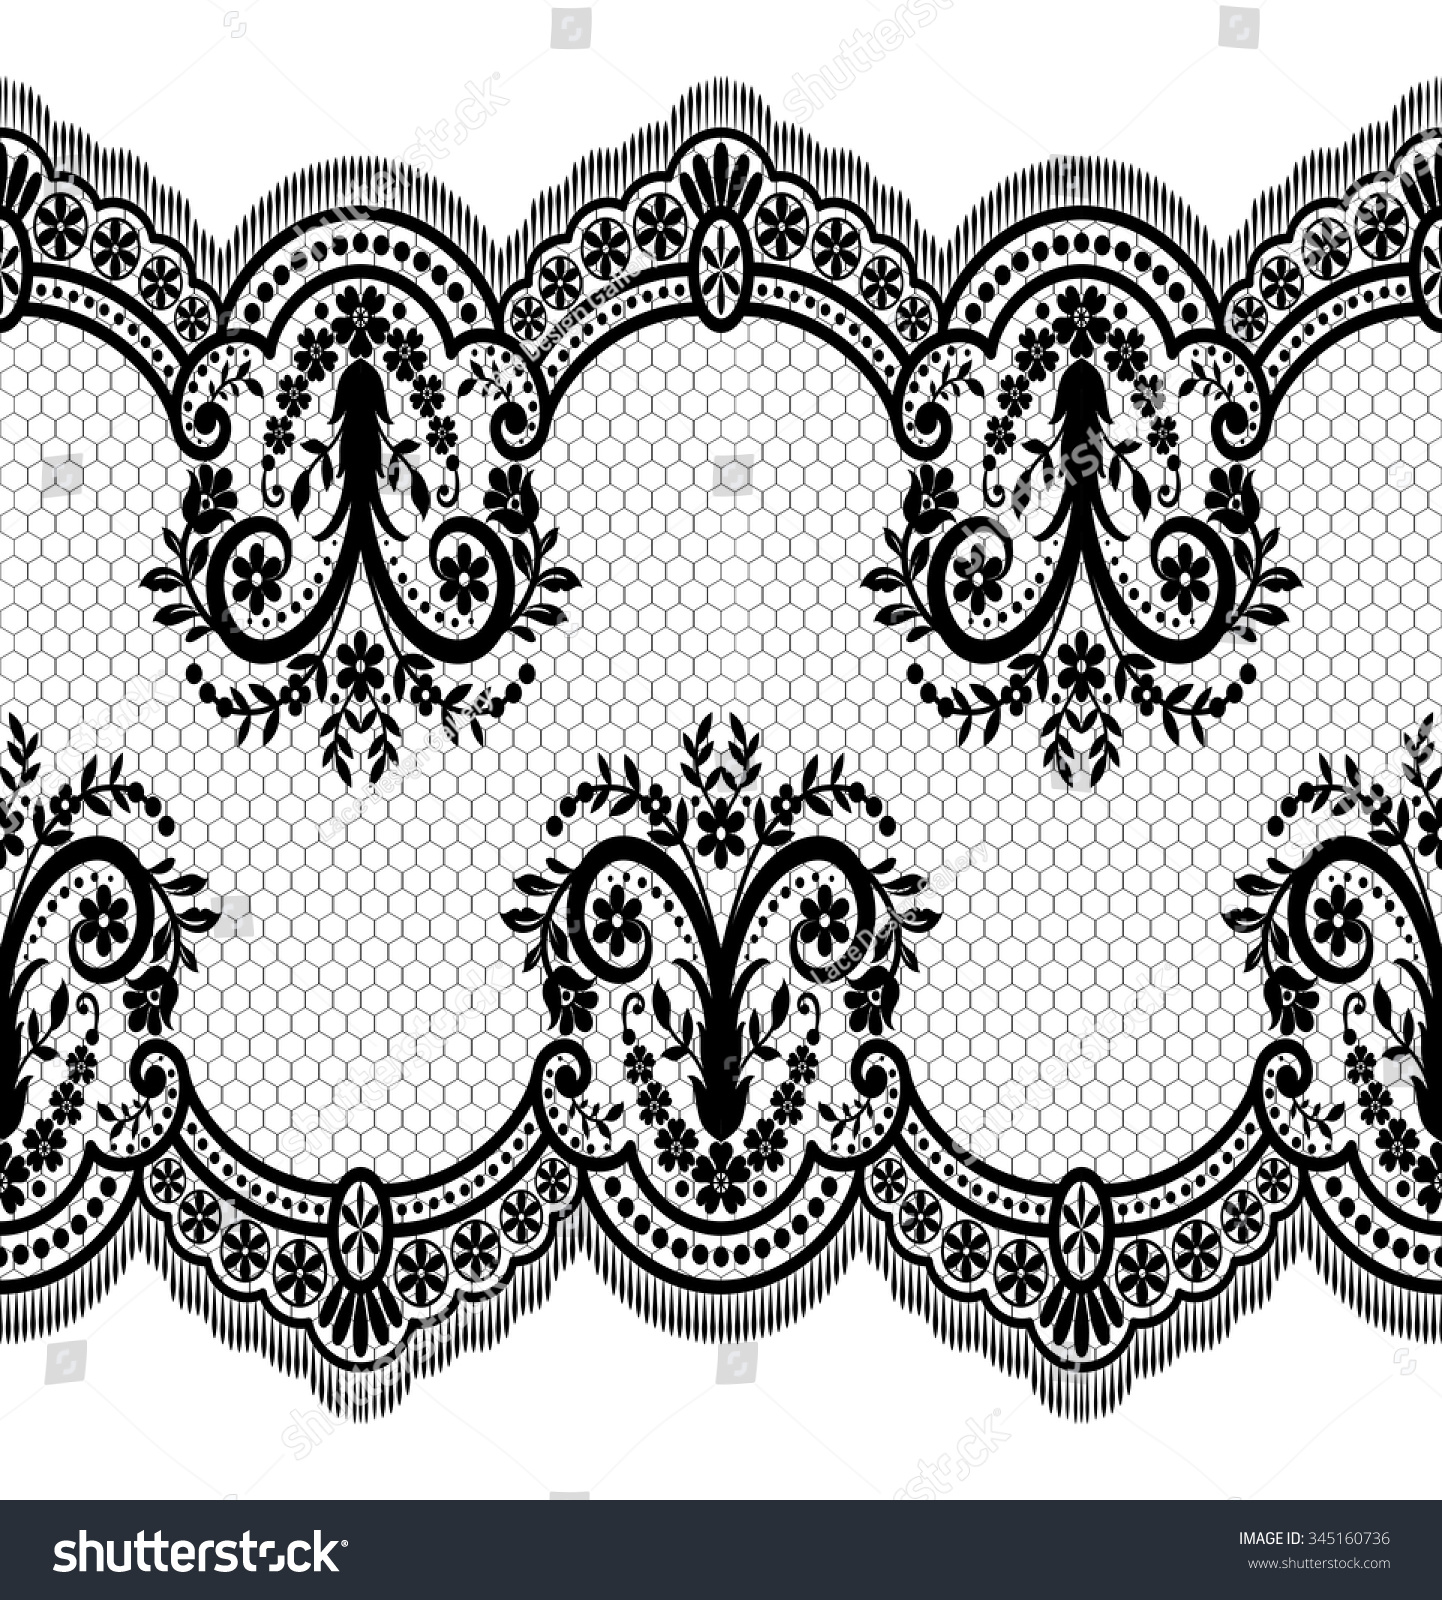 Seamless Lace Pattern Flower Vintage Vector Stock Vector 345160736 ...